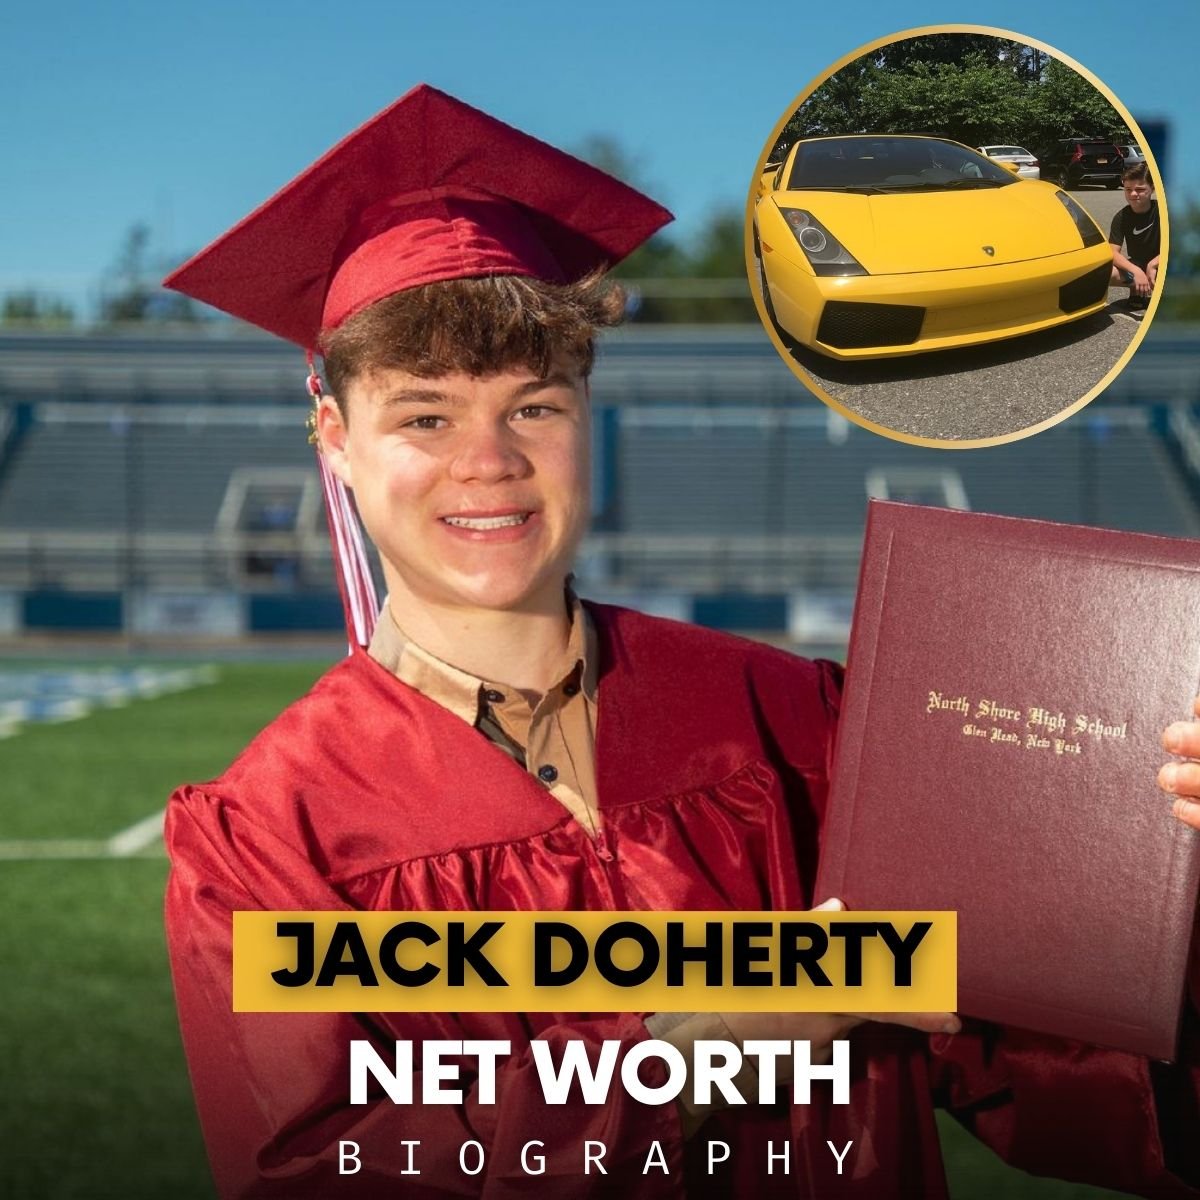 Picture of jack doherty from his graduation